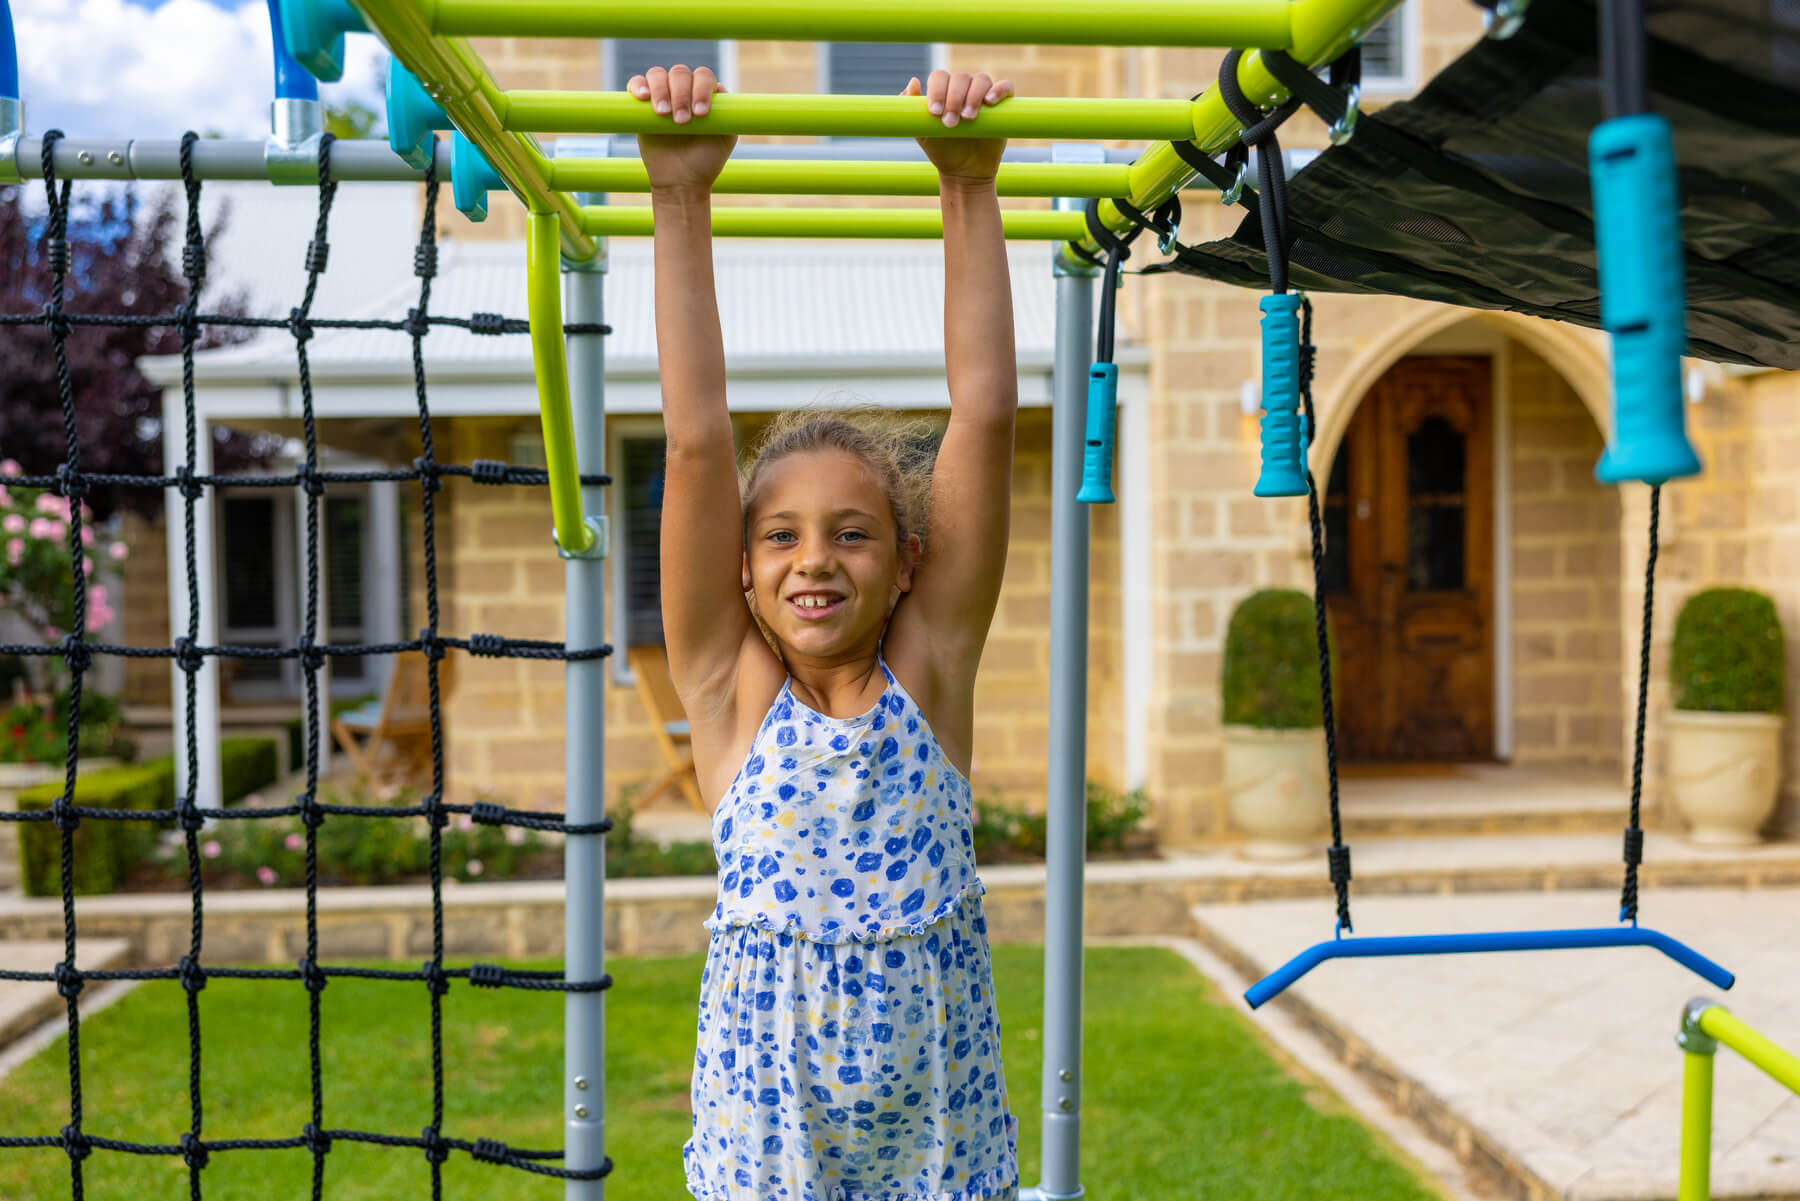 Embracing Play & Progress: Monkey Bars and Occupational Therapy